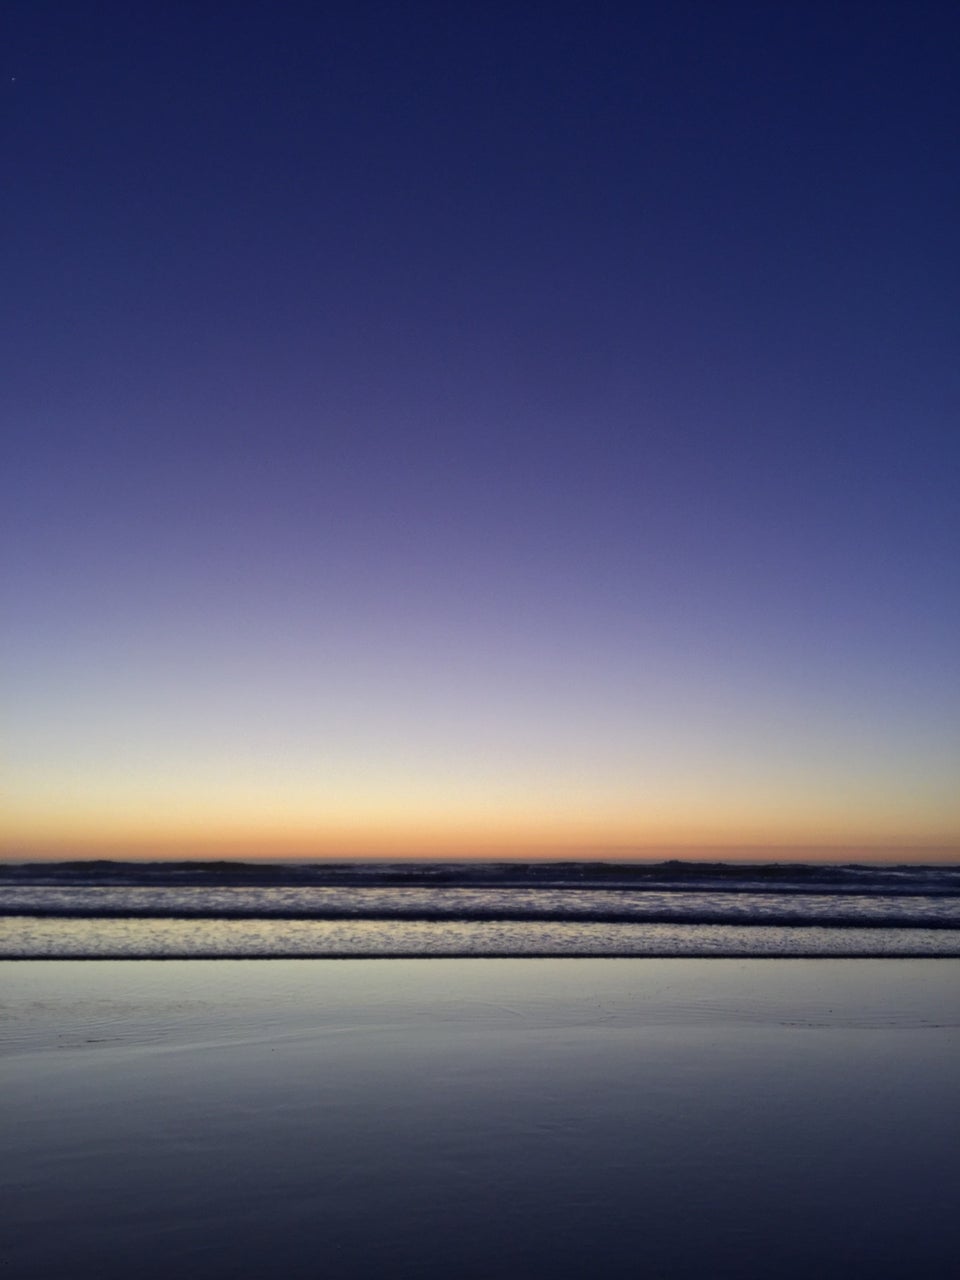 Deep blue sky with a gradient to purple then to orange at the horizon just above the ocean, gentle small waves, glistening sand reflecting light gray to darker blue gray.